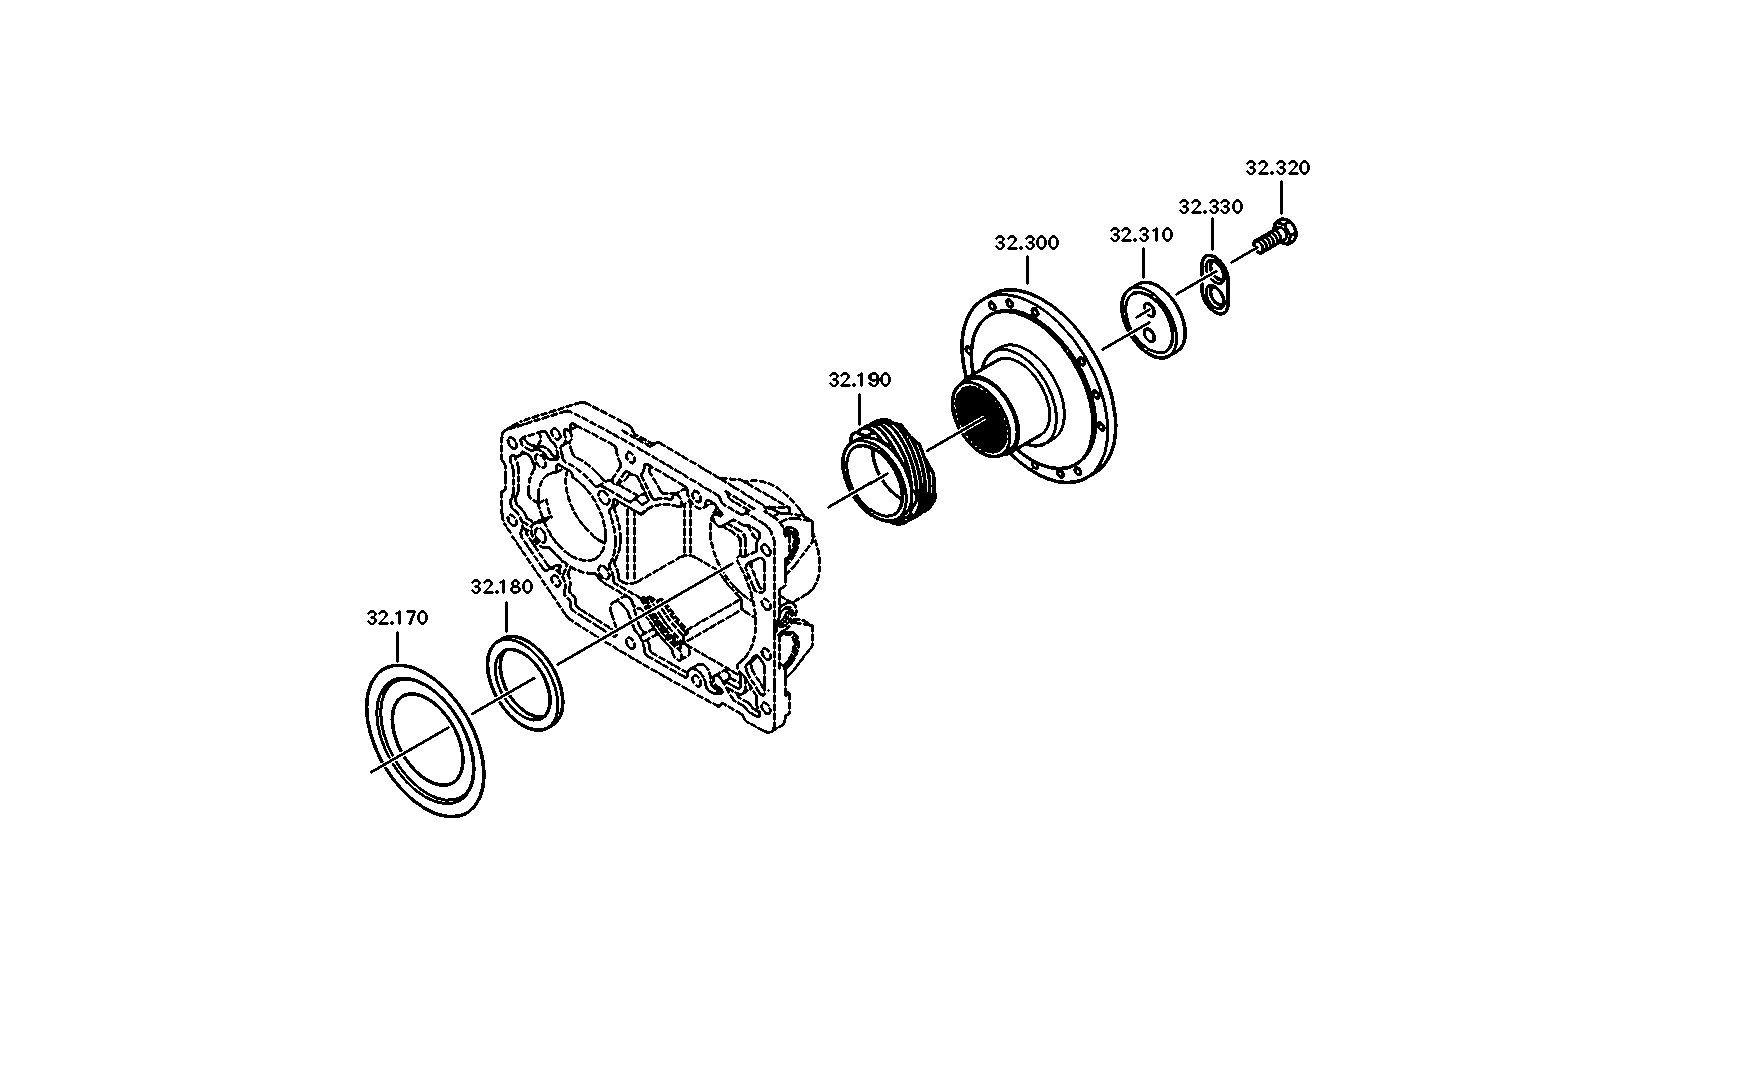 drawing for LIEBHERR GMBH 500736408 - PLANET CARRIER (figure 3)